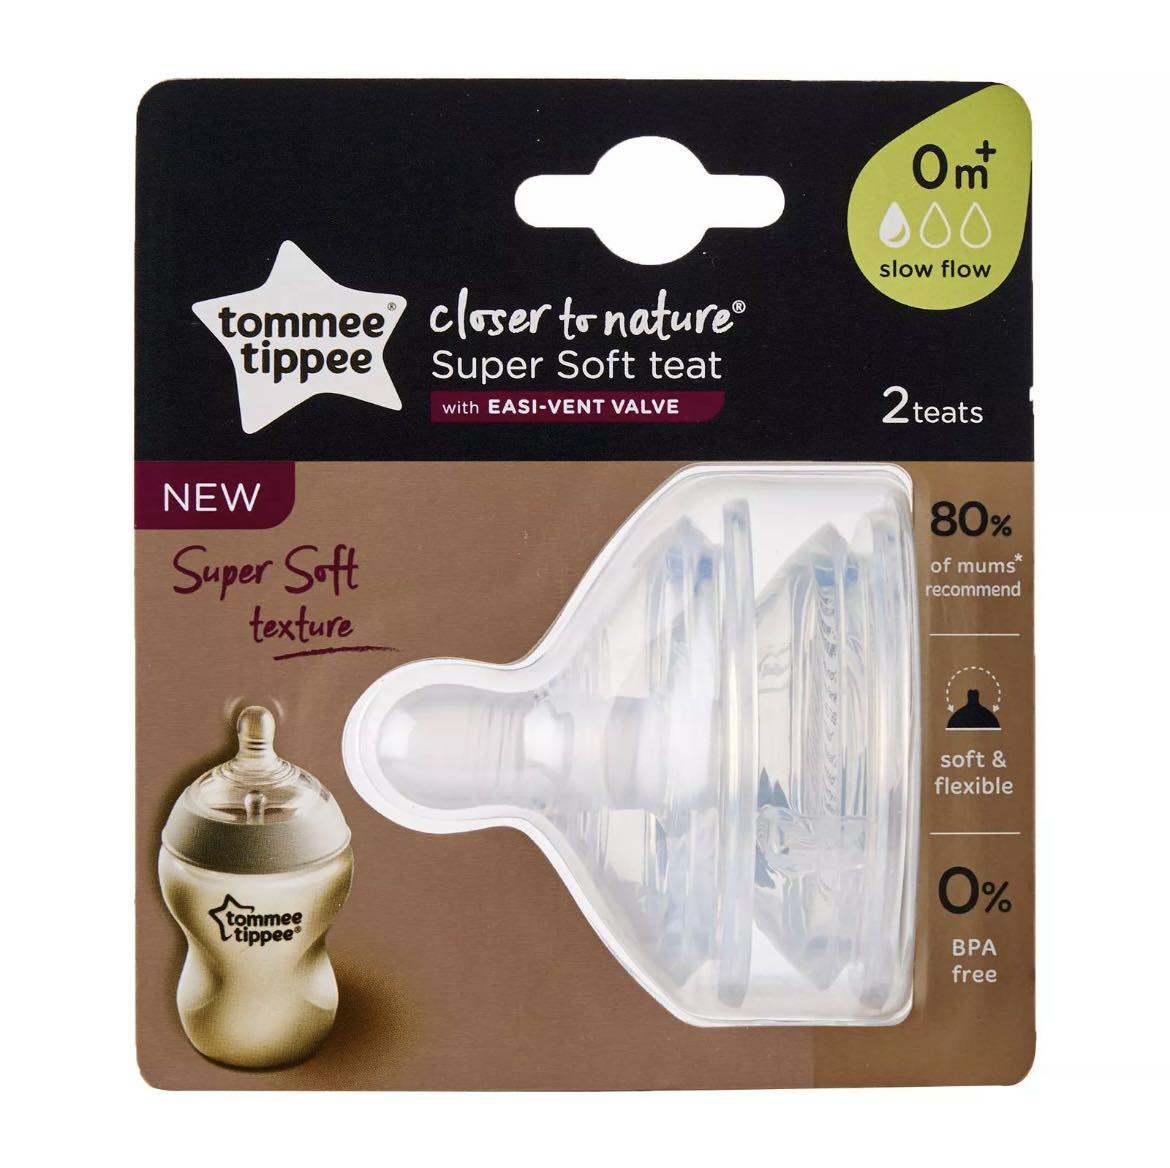 Tommee Tippee Super Soft Teat Fast Flow - Tommee Tippee